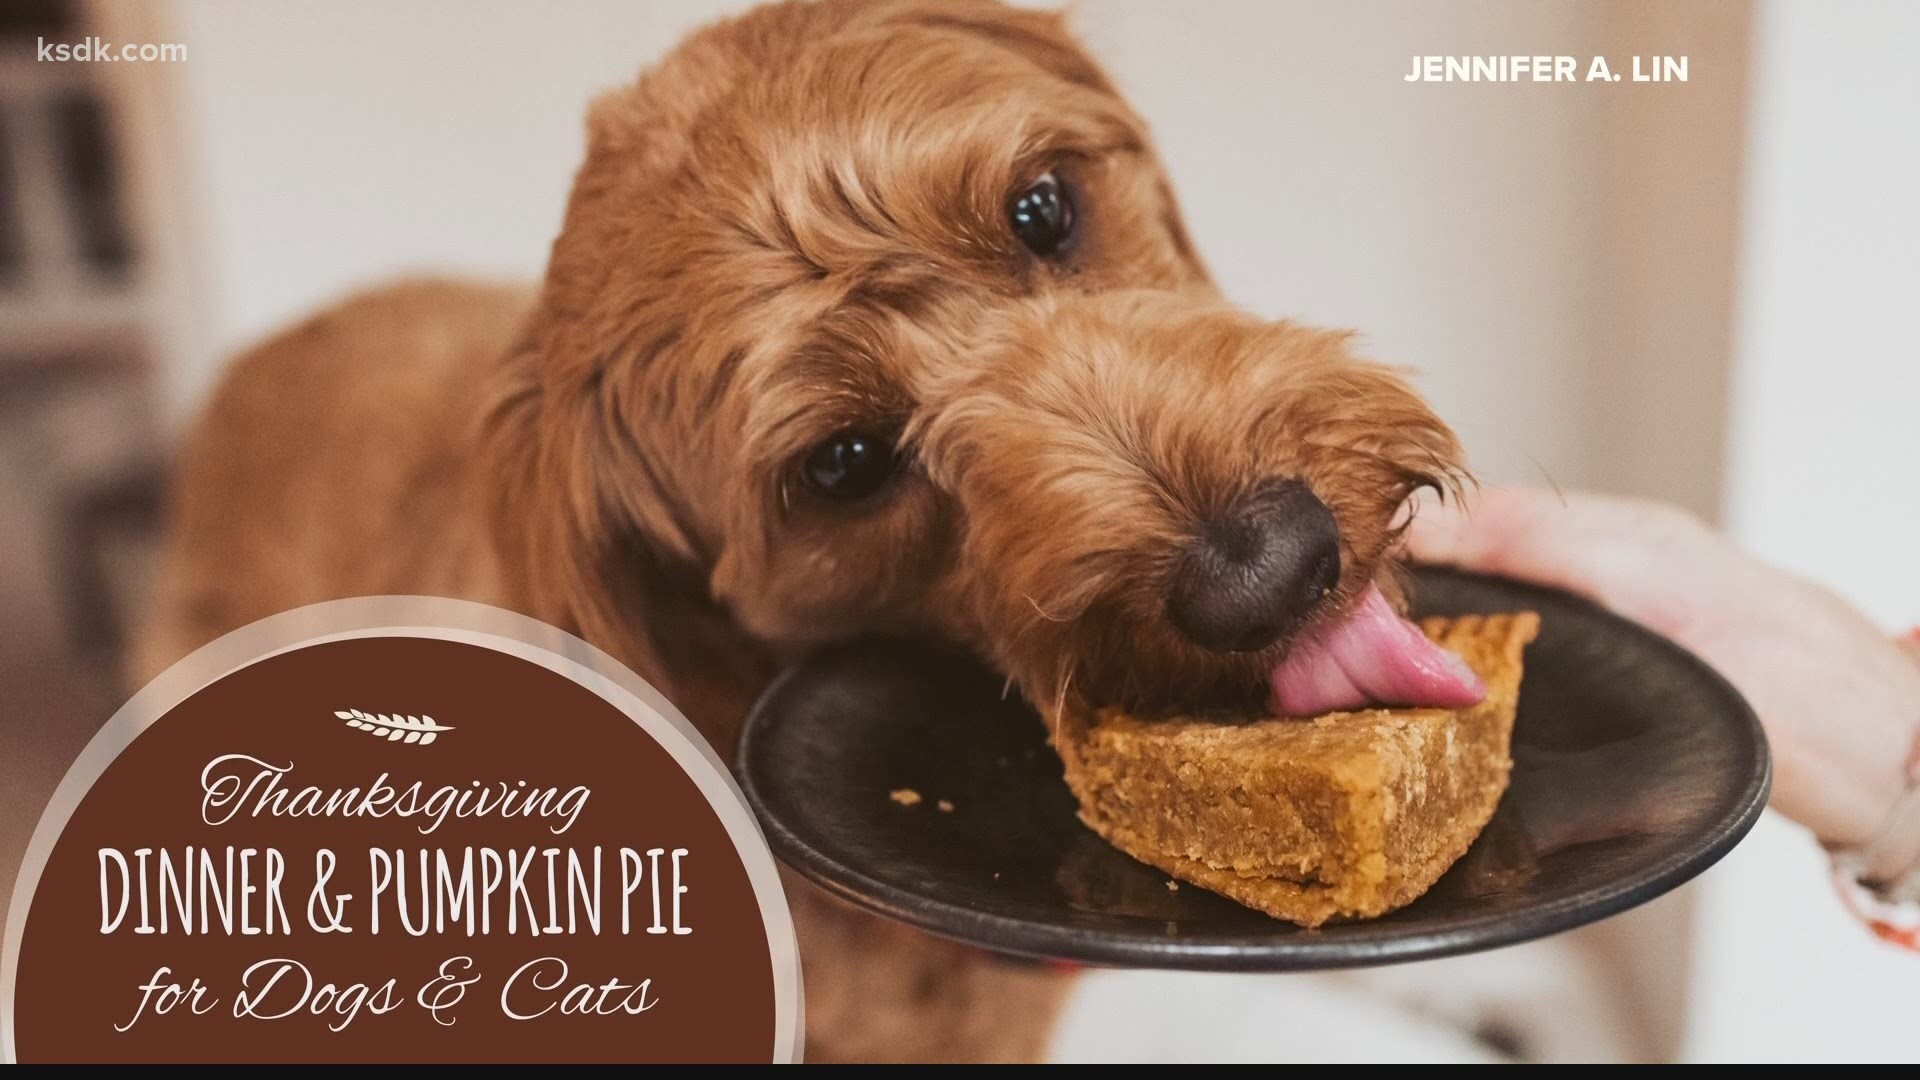 Keep your pet healthy but part of the tradition this Thanksgiving with pet-safe pumpkin pie.